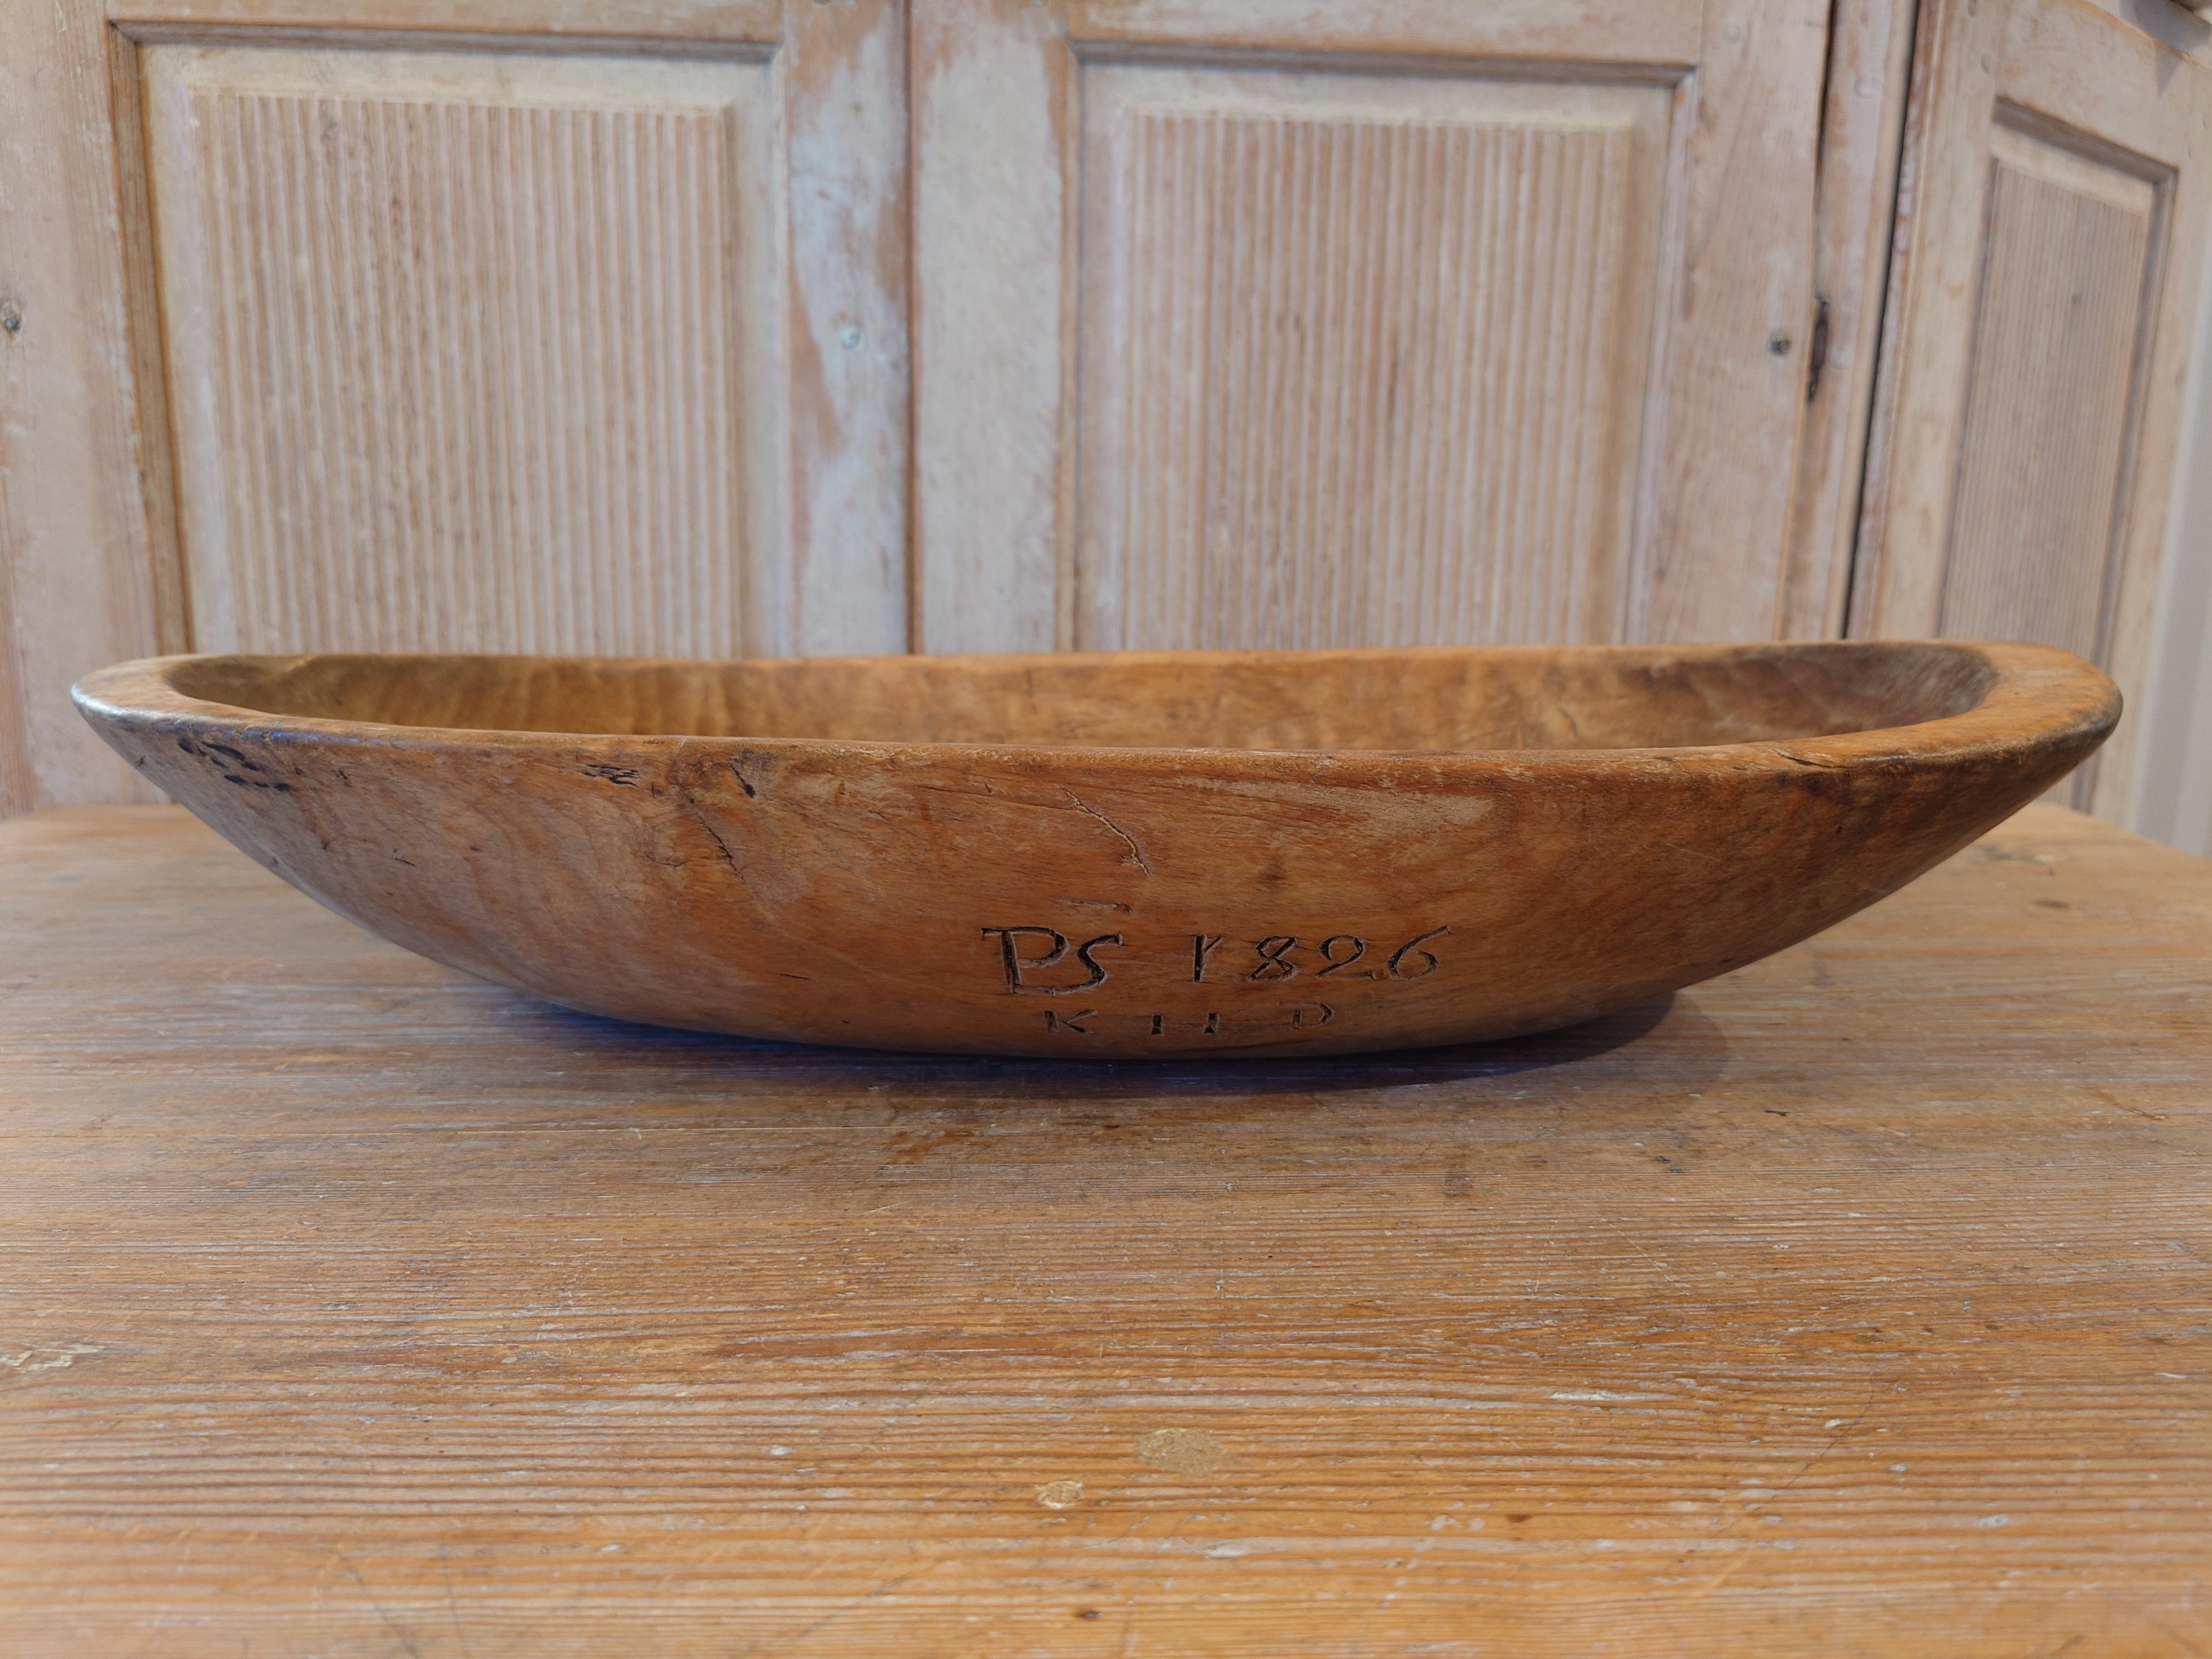 Gorgeus antique Swedish Wooden bowl in oval shape from Dalarna Northern Sweden.
Monogram and dating 1826.
The surfaces are naturally patinated due tue age,
You can see the use of time.
A truley remarkable piece ,that  would make a great statement in